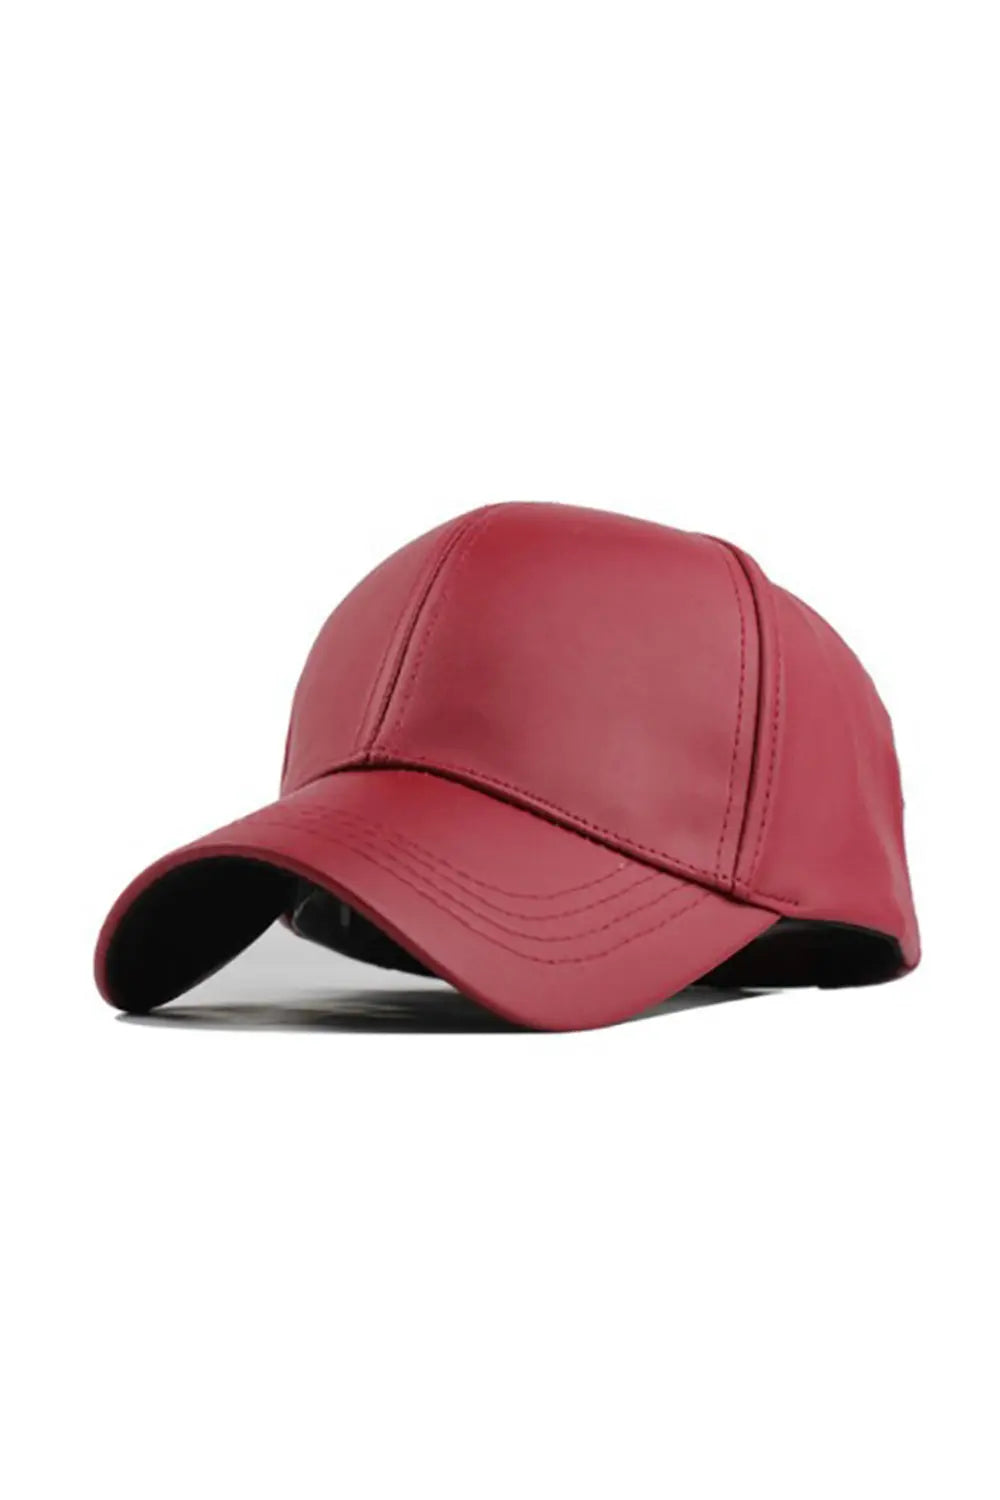 Leather Baseball Cap - Red - Strange-Clothes